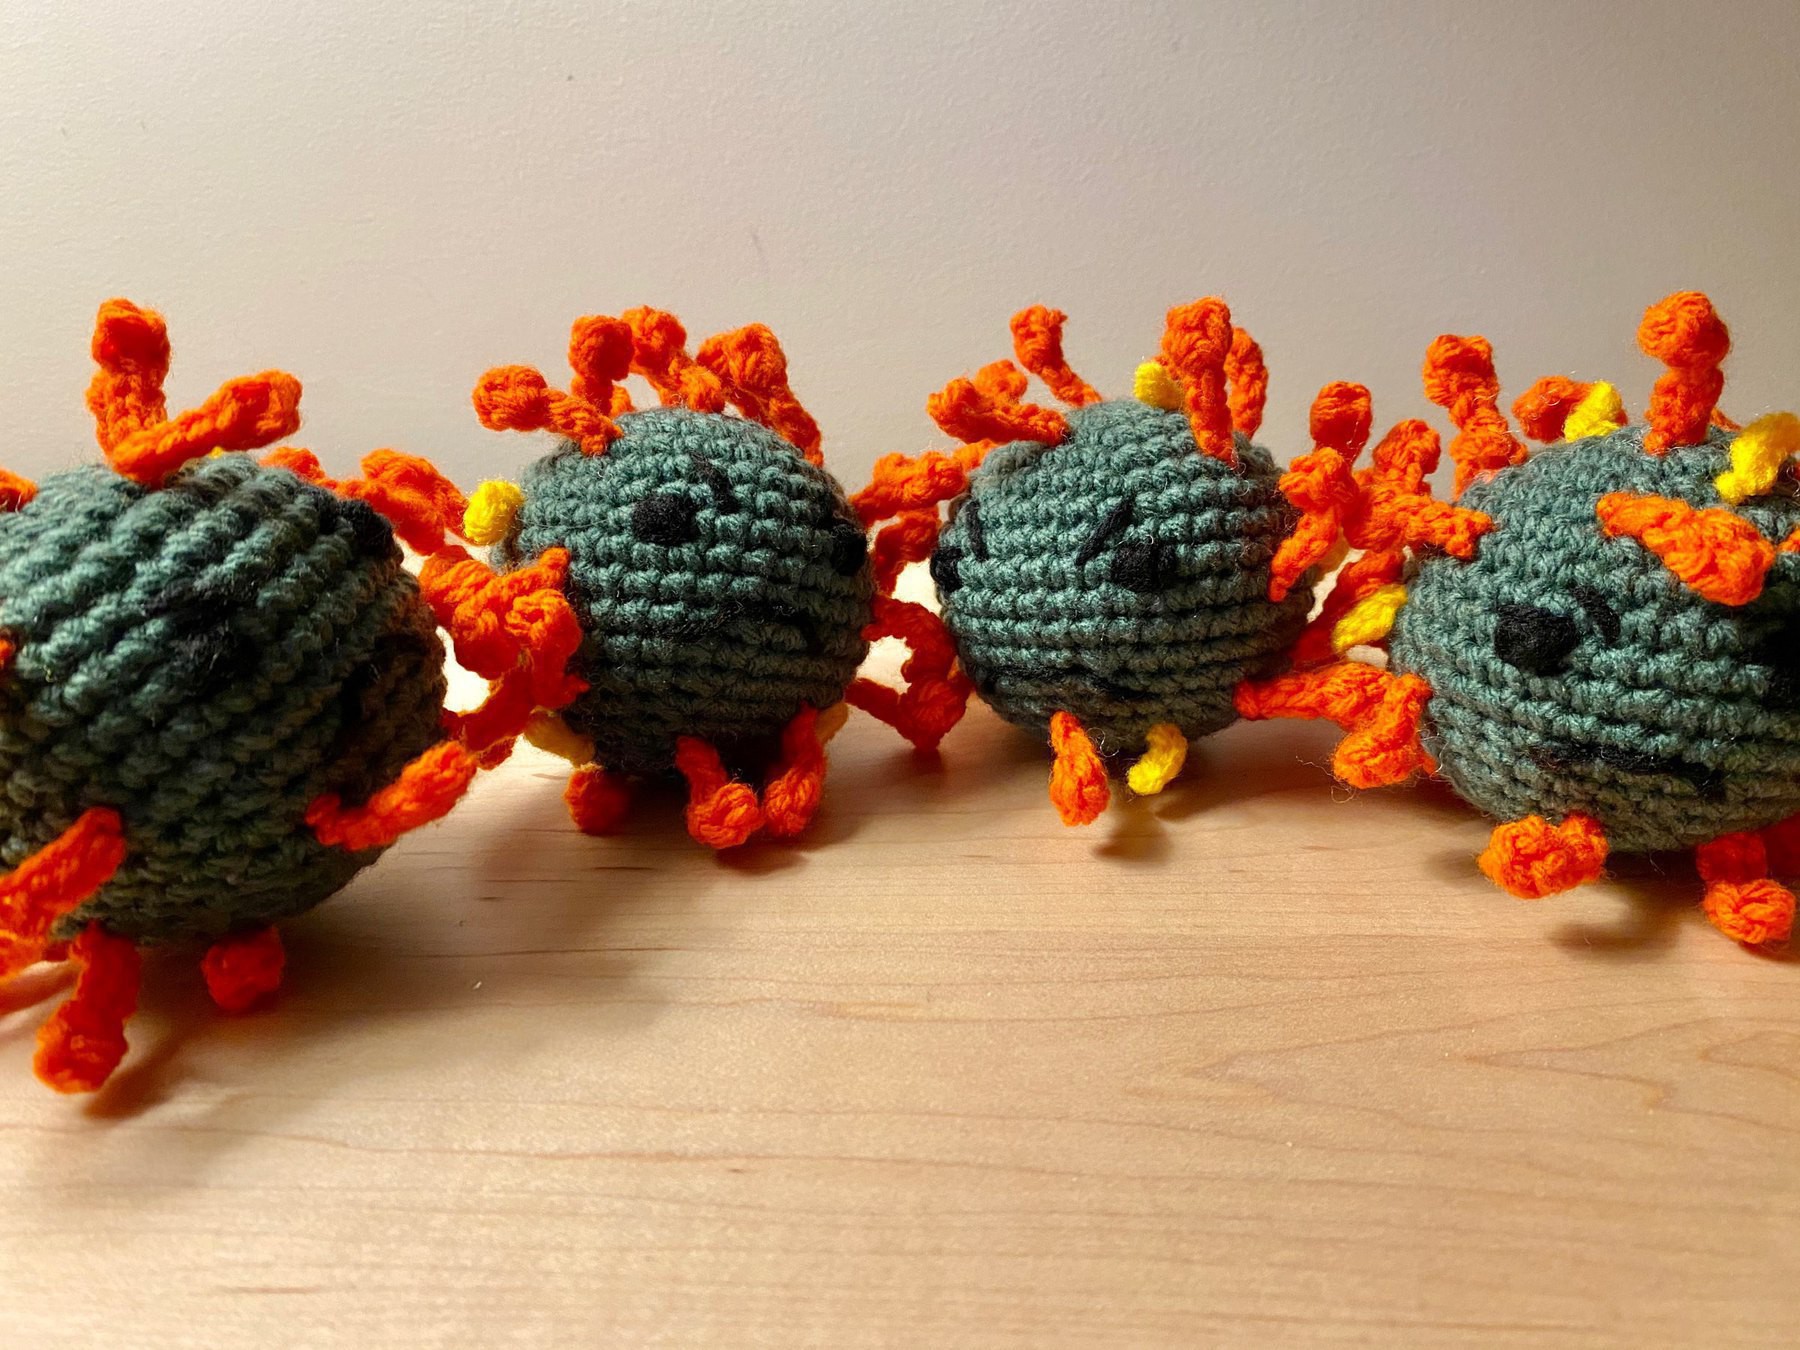 Crocheted little Covid-19 characters